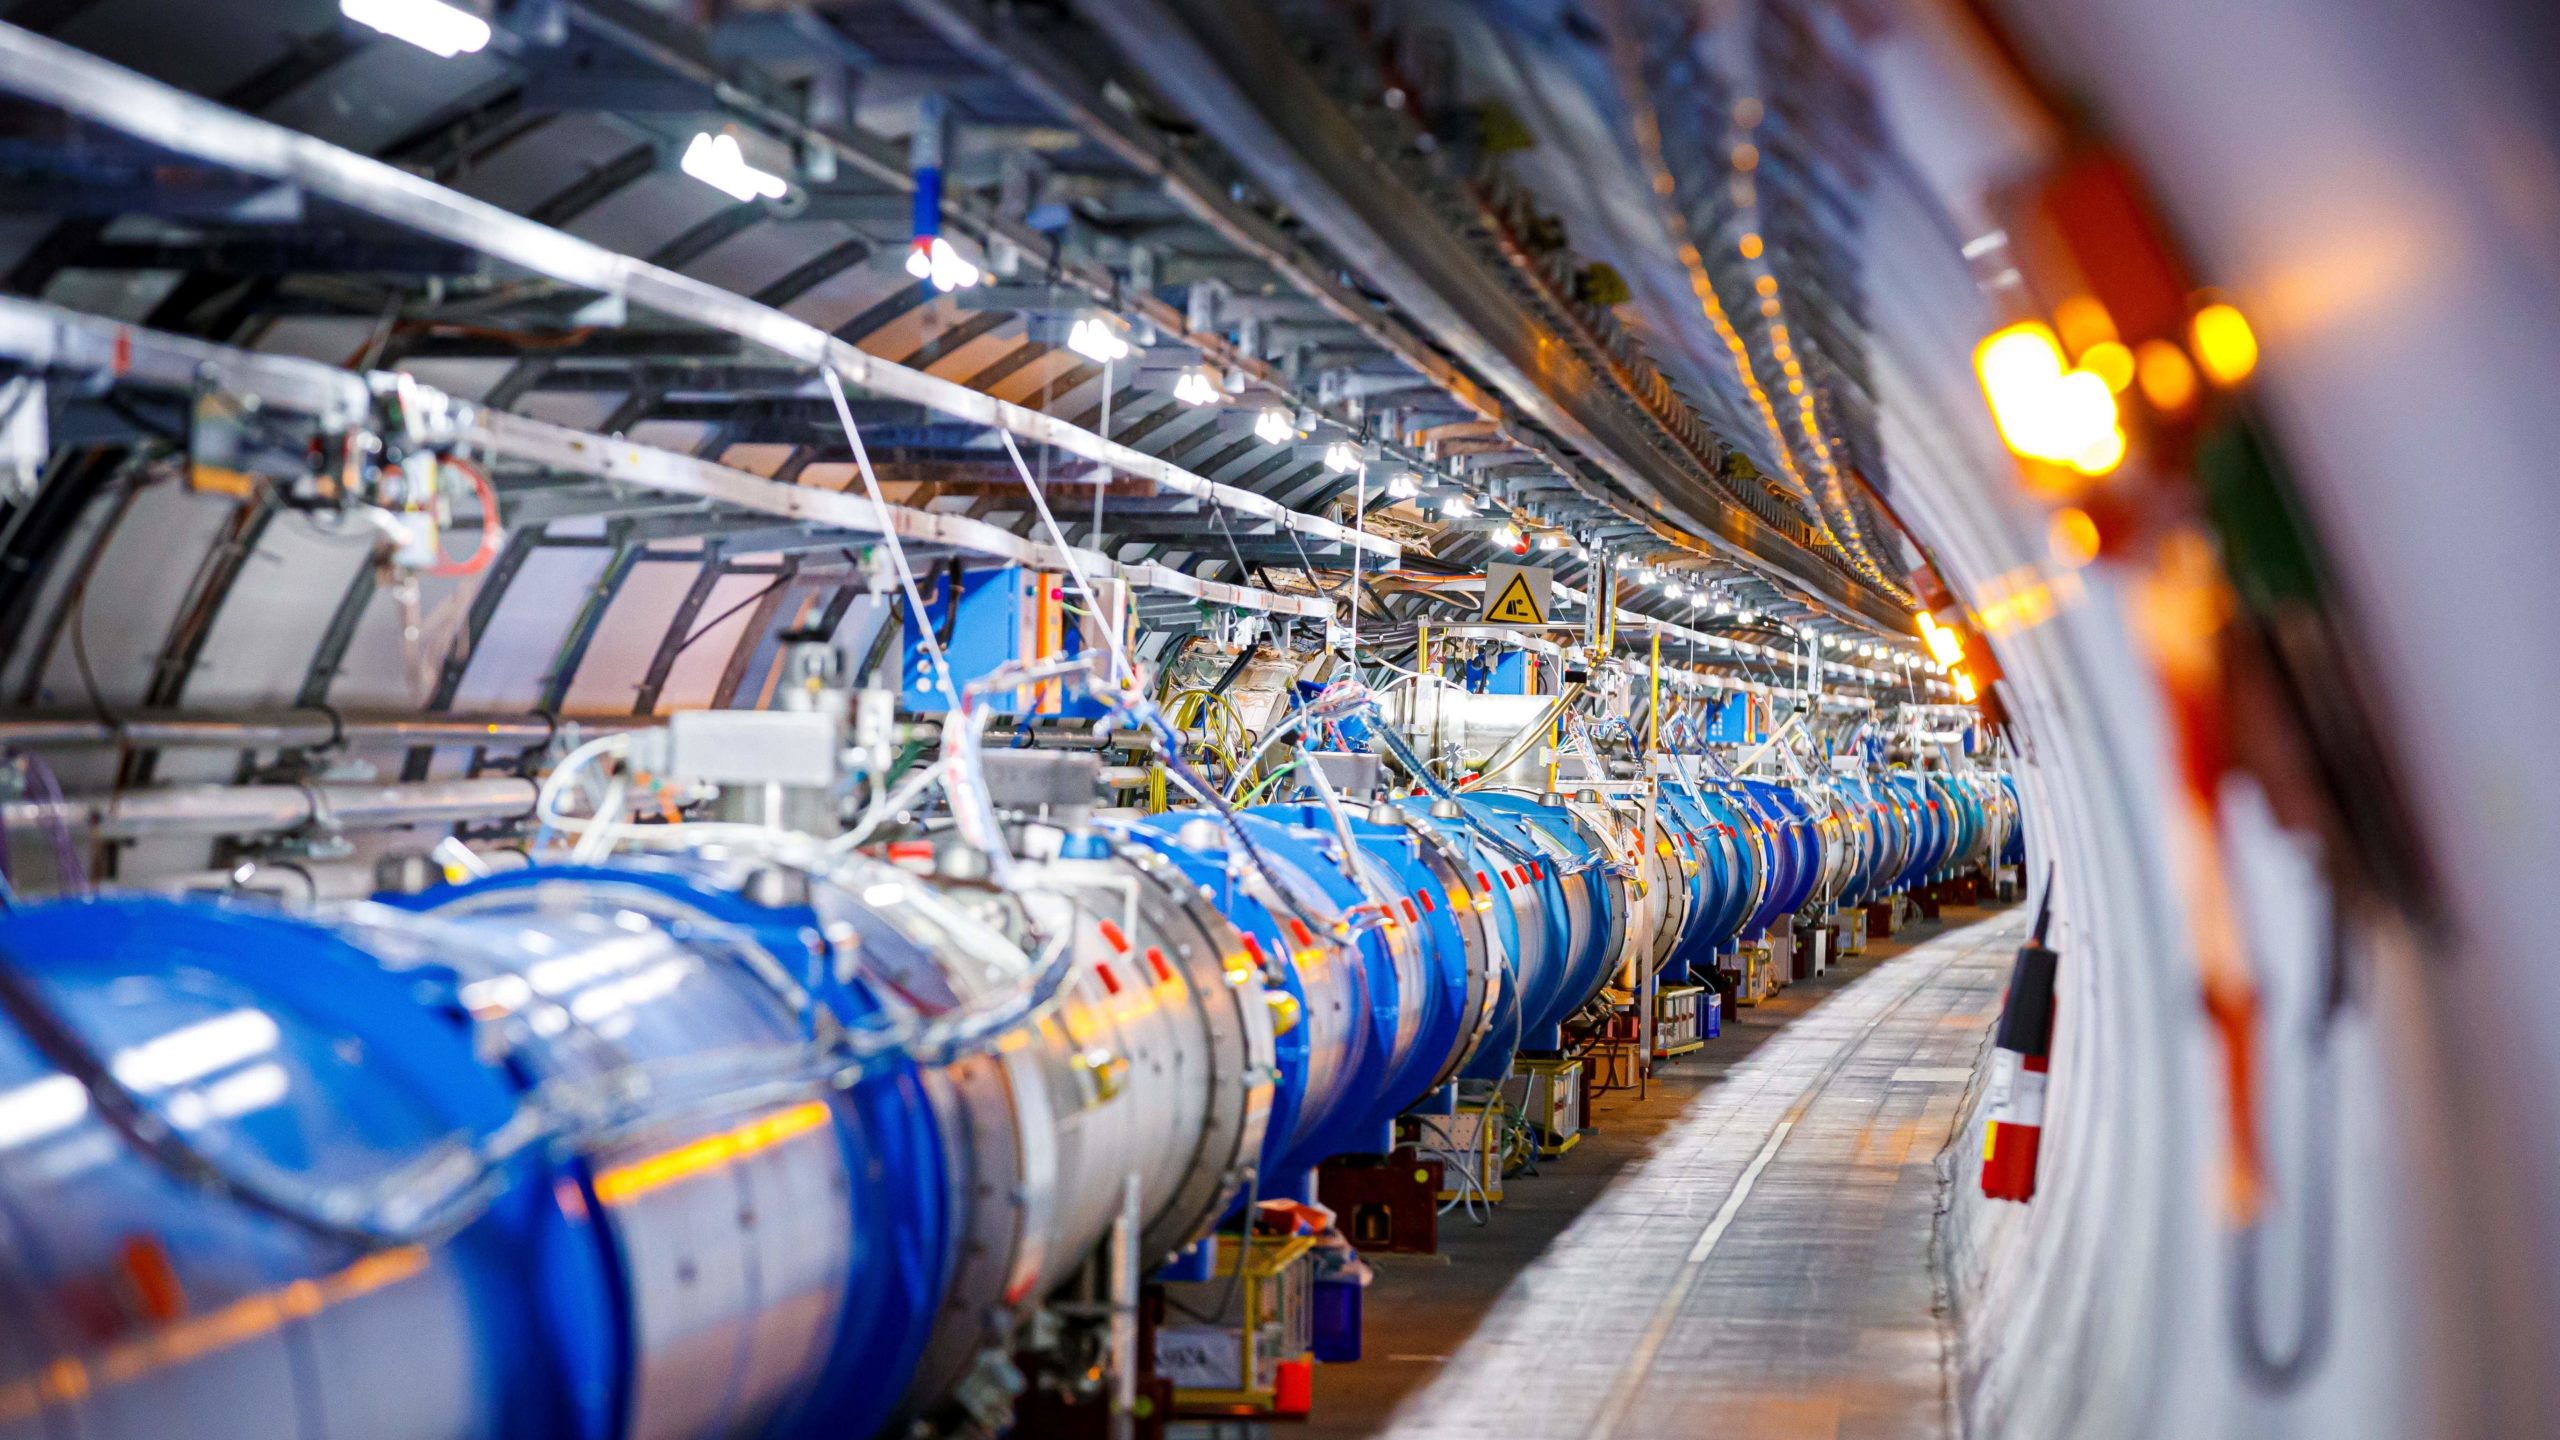 Some of the 1232 dipole magnets that bend the path of accelerated protons are pictured in the Large Hadron Collider (LHC) in a tunnel of the European Organisation for Nuclear Research (CERN), during maintenance work. (Photo: Valentin Flauraud / AFP, Getty Images)